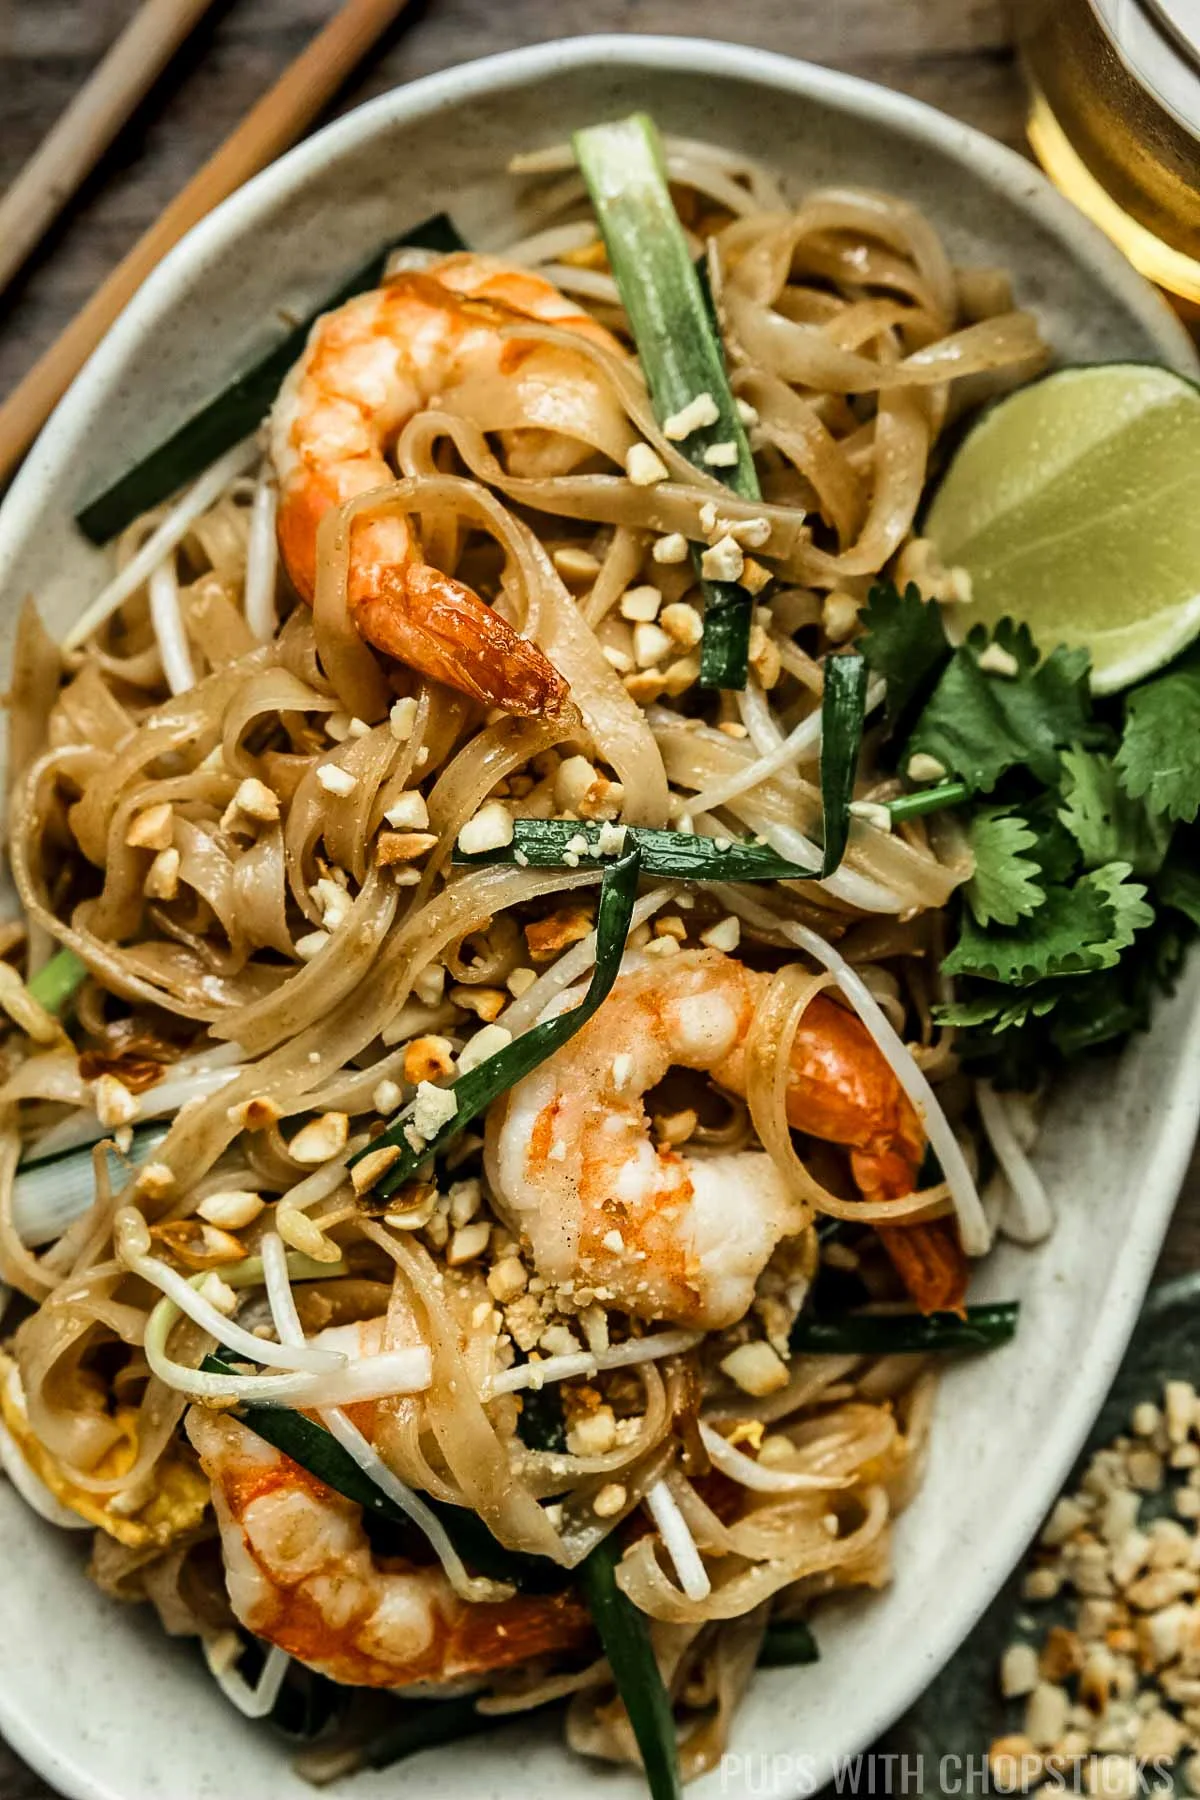 Pad thai with shrimp on a beige oval plate served with crushed peanuts and lime wedges